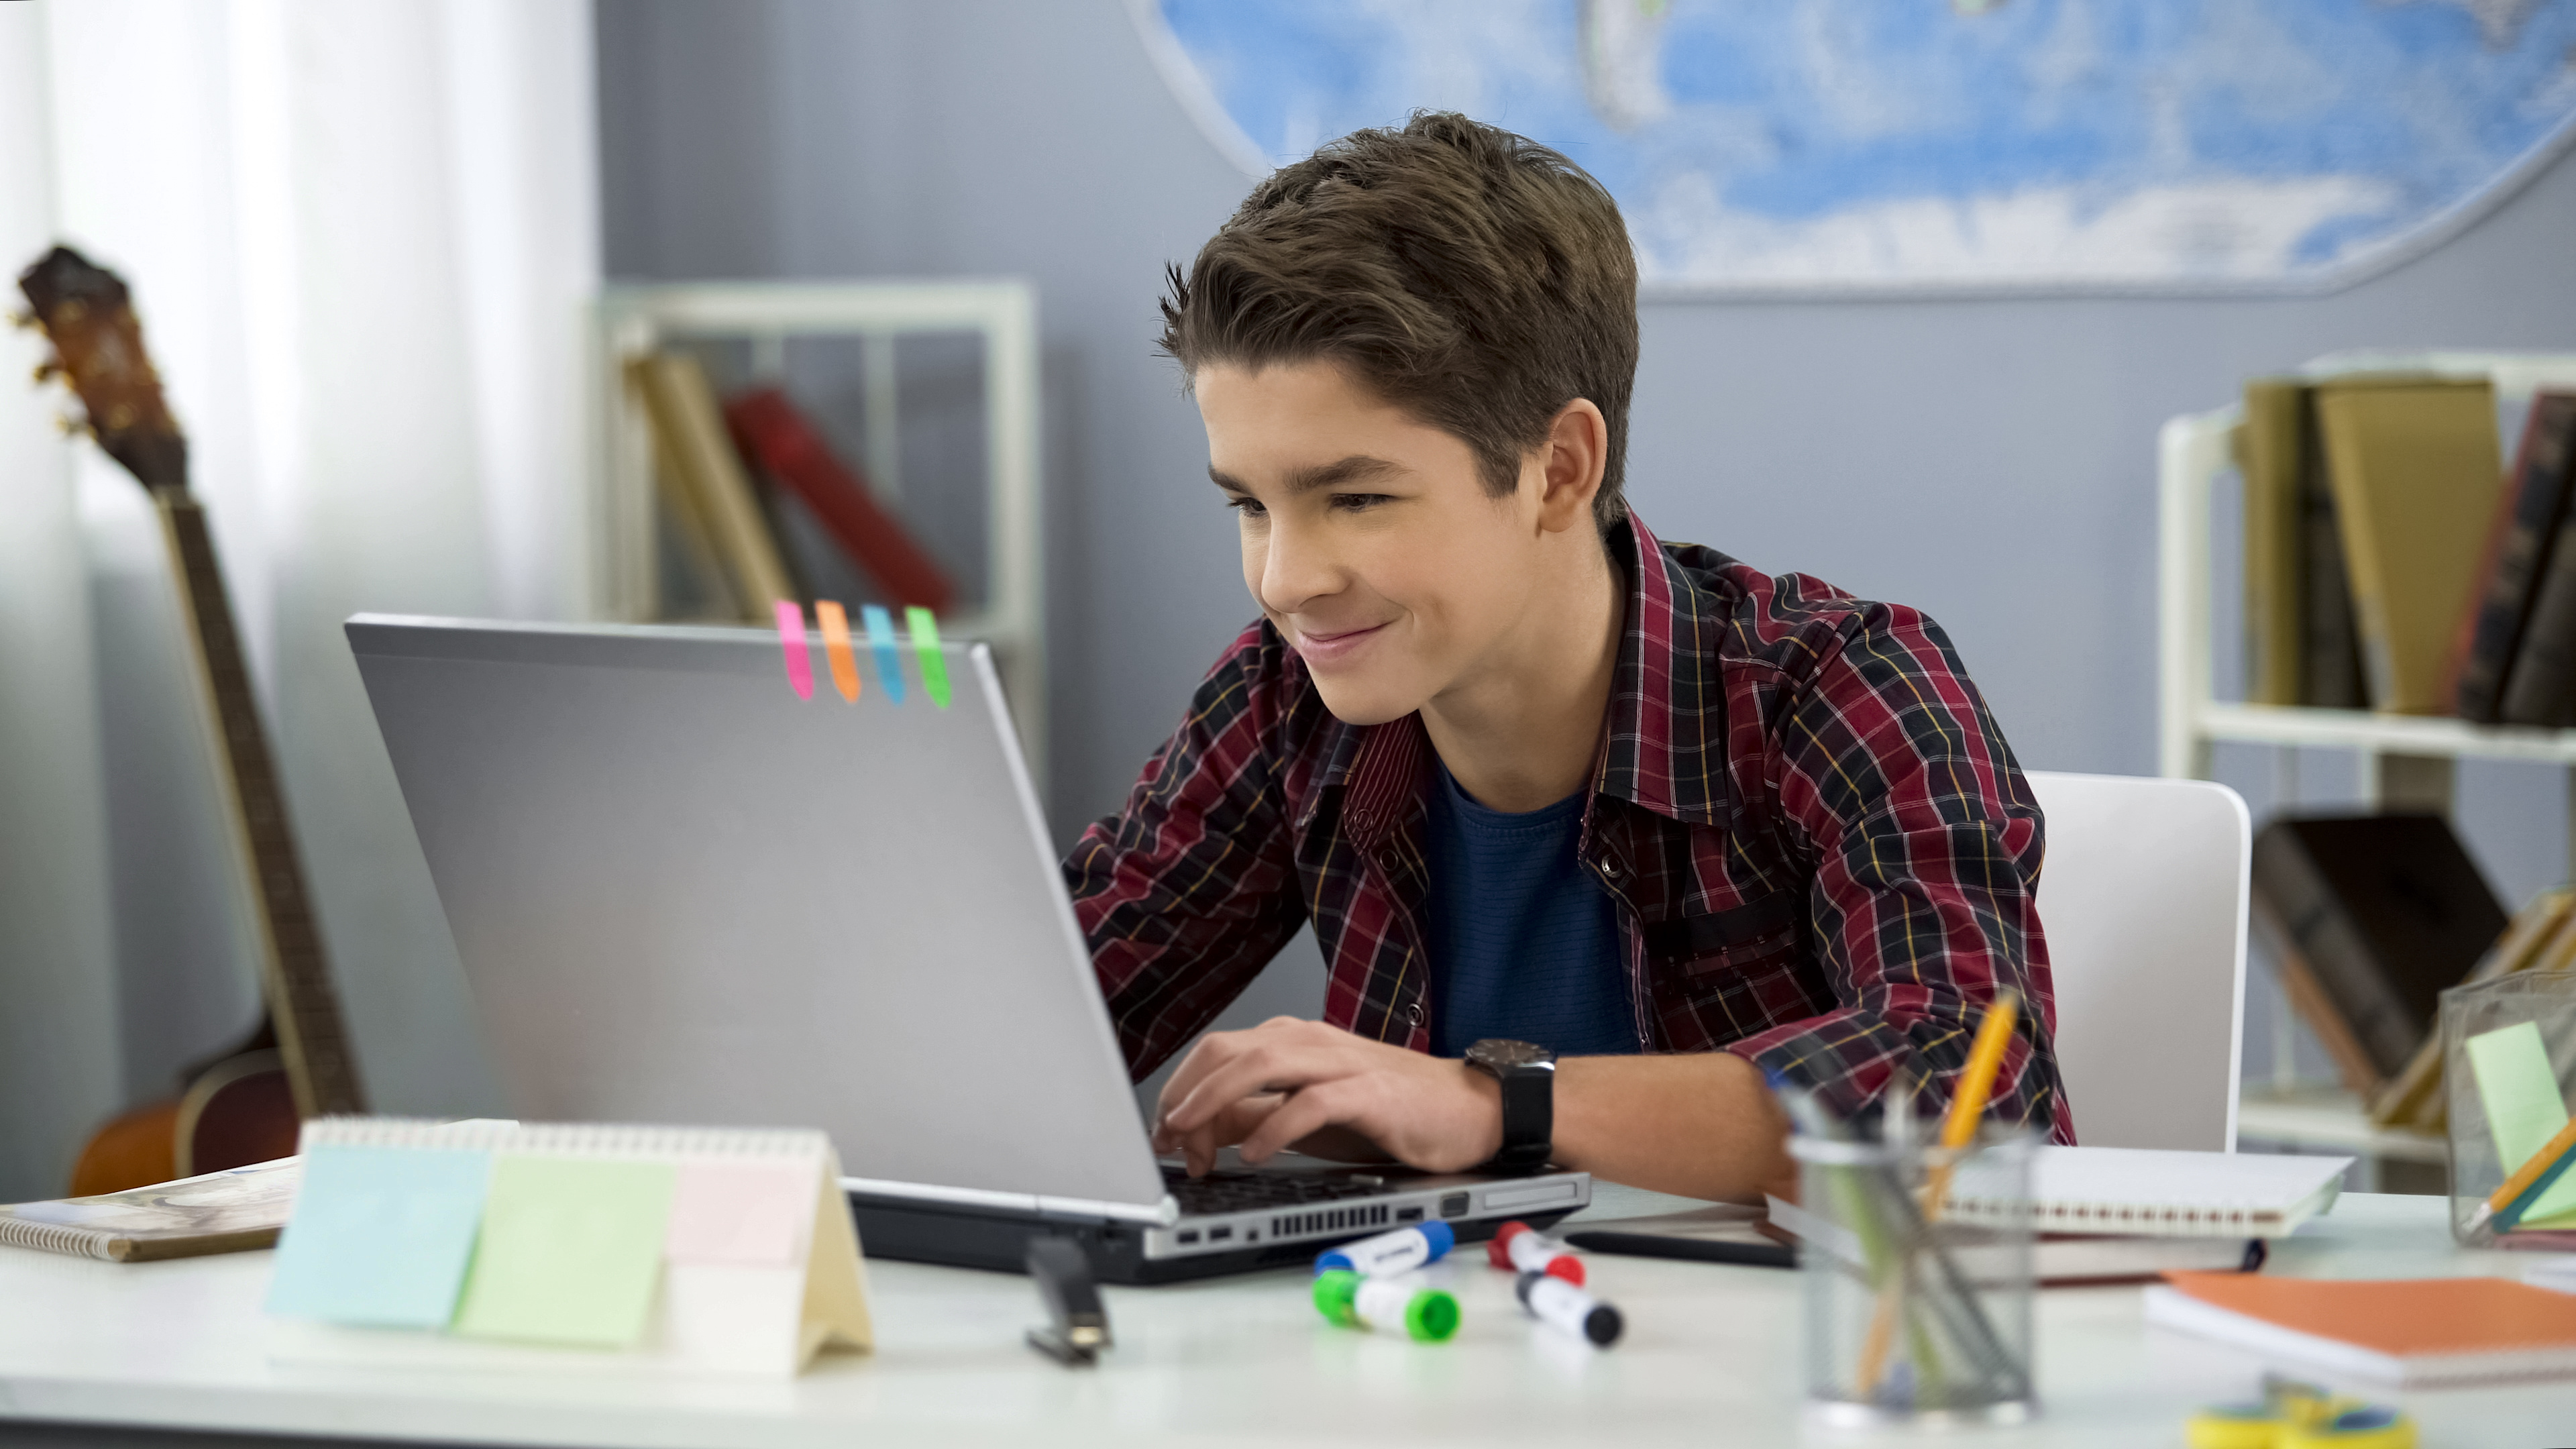 young boy learning in front of laptop smiling